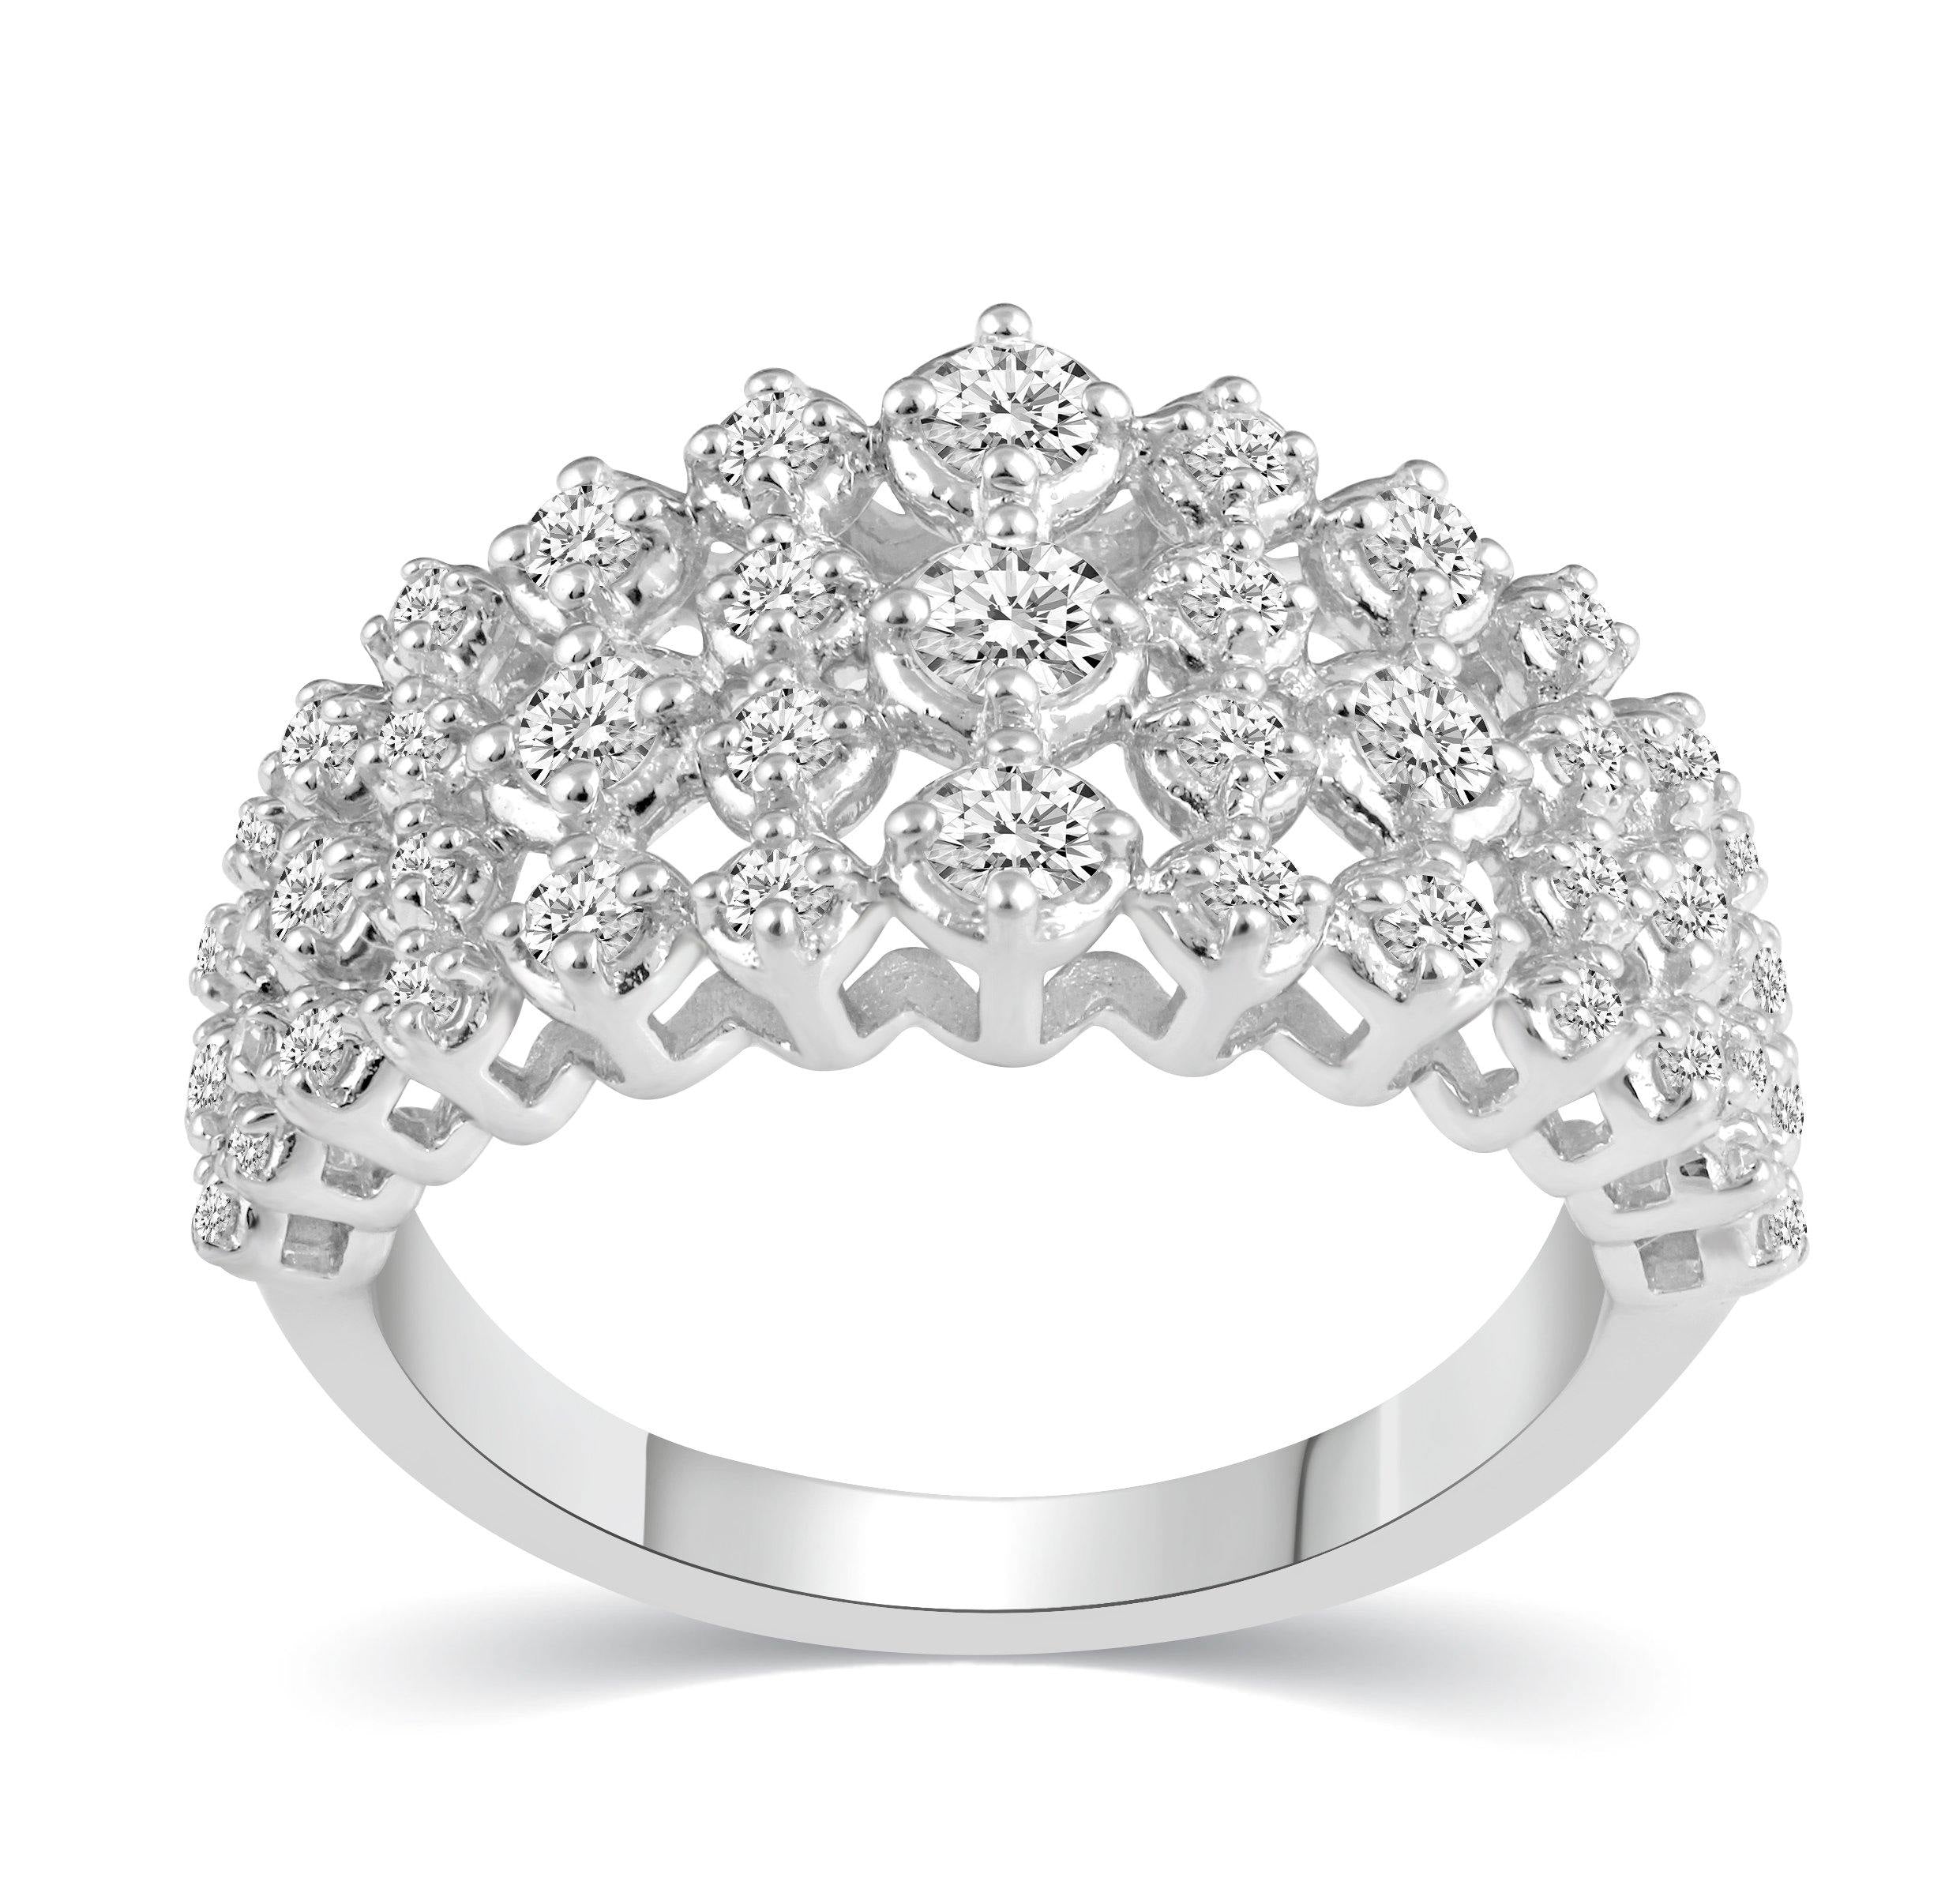 1 - 1/2 CT TW Diamond Anniversary Ring in Sterling Silver